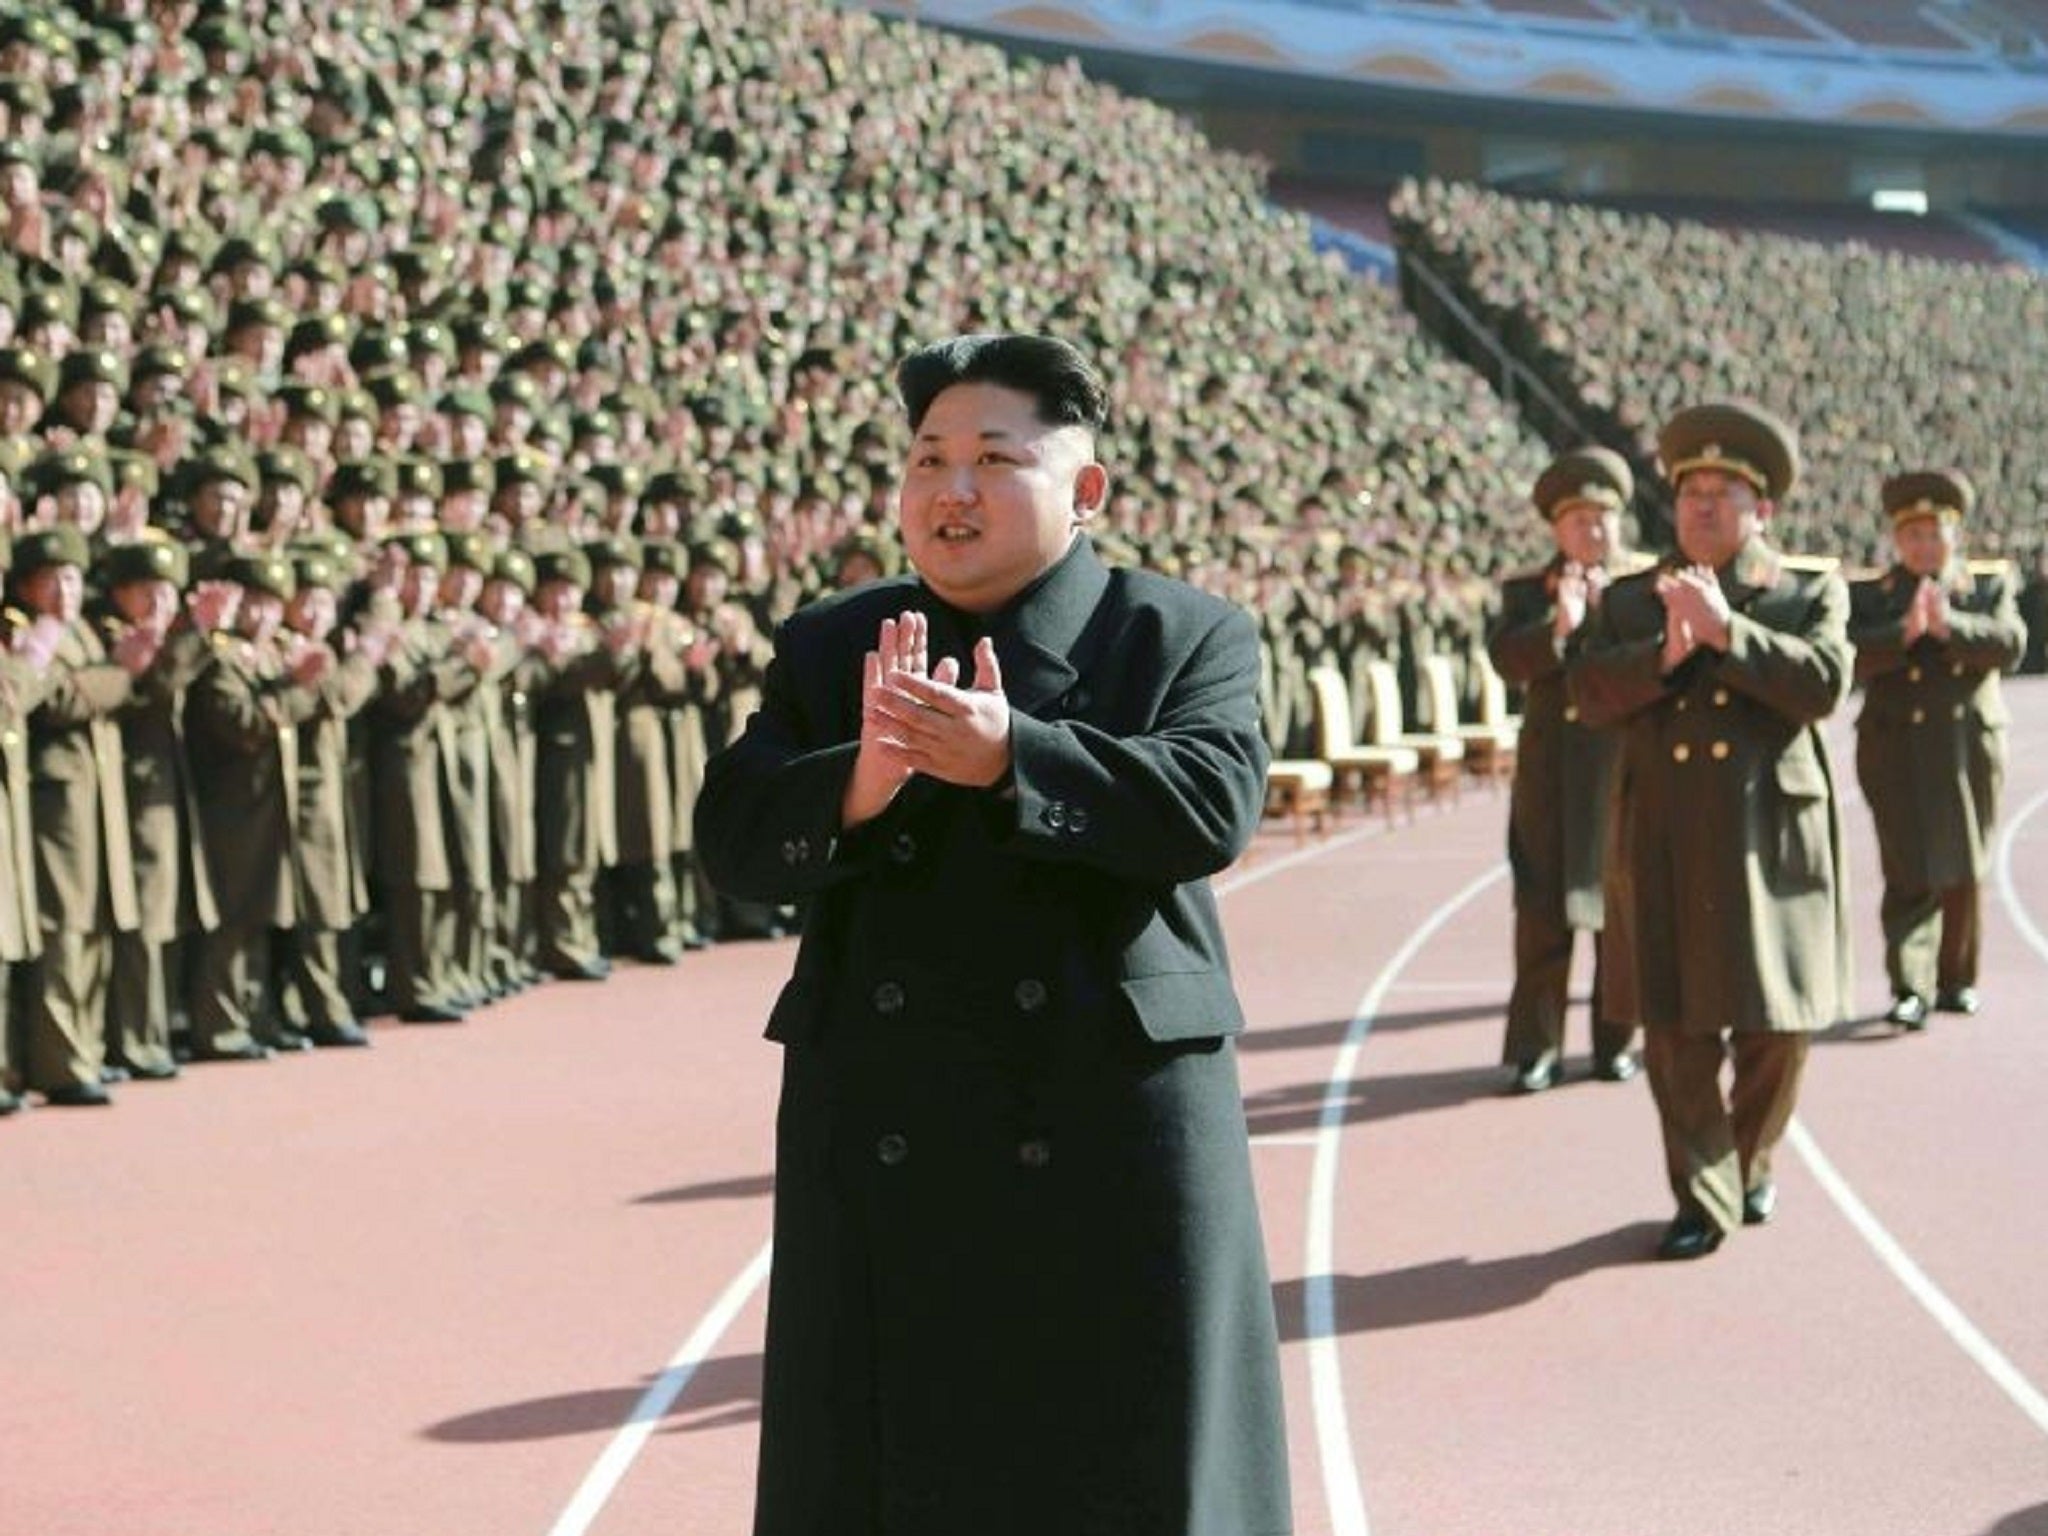 Kim Jong-un inspects the country's military